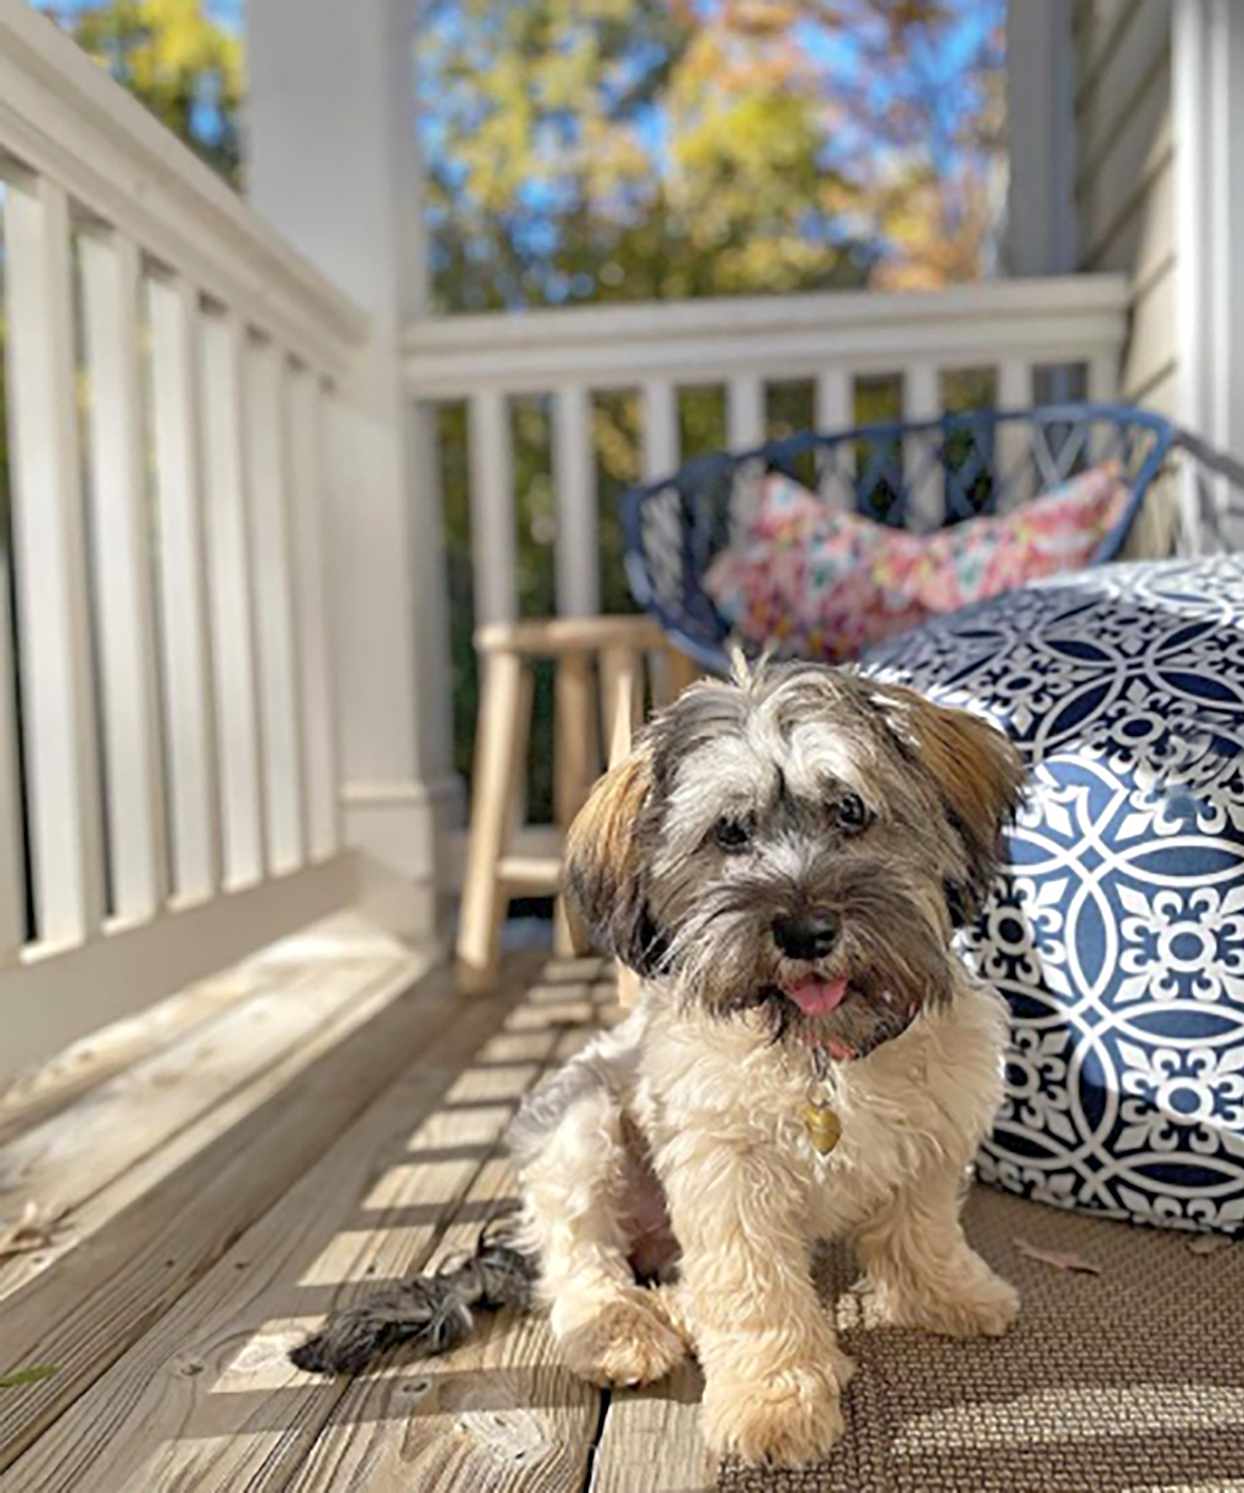 havanese shih tzu mix sitting on a porch with her tongue out